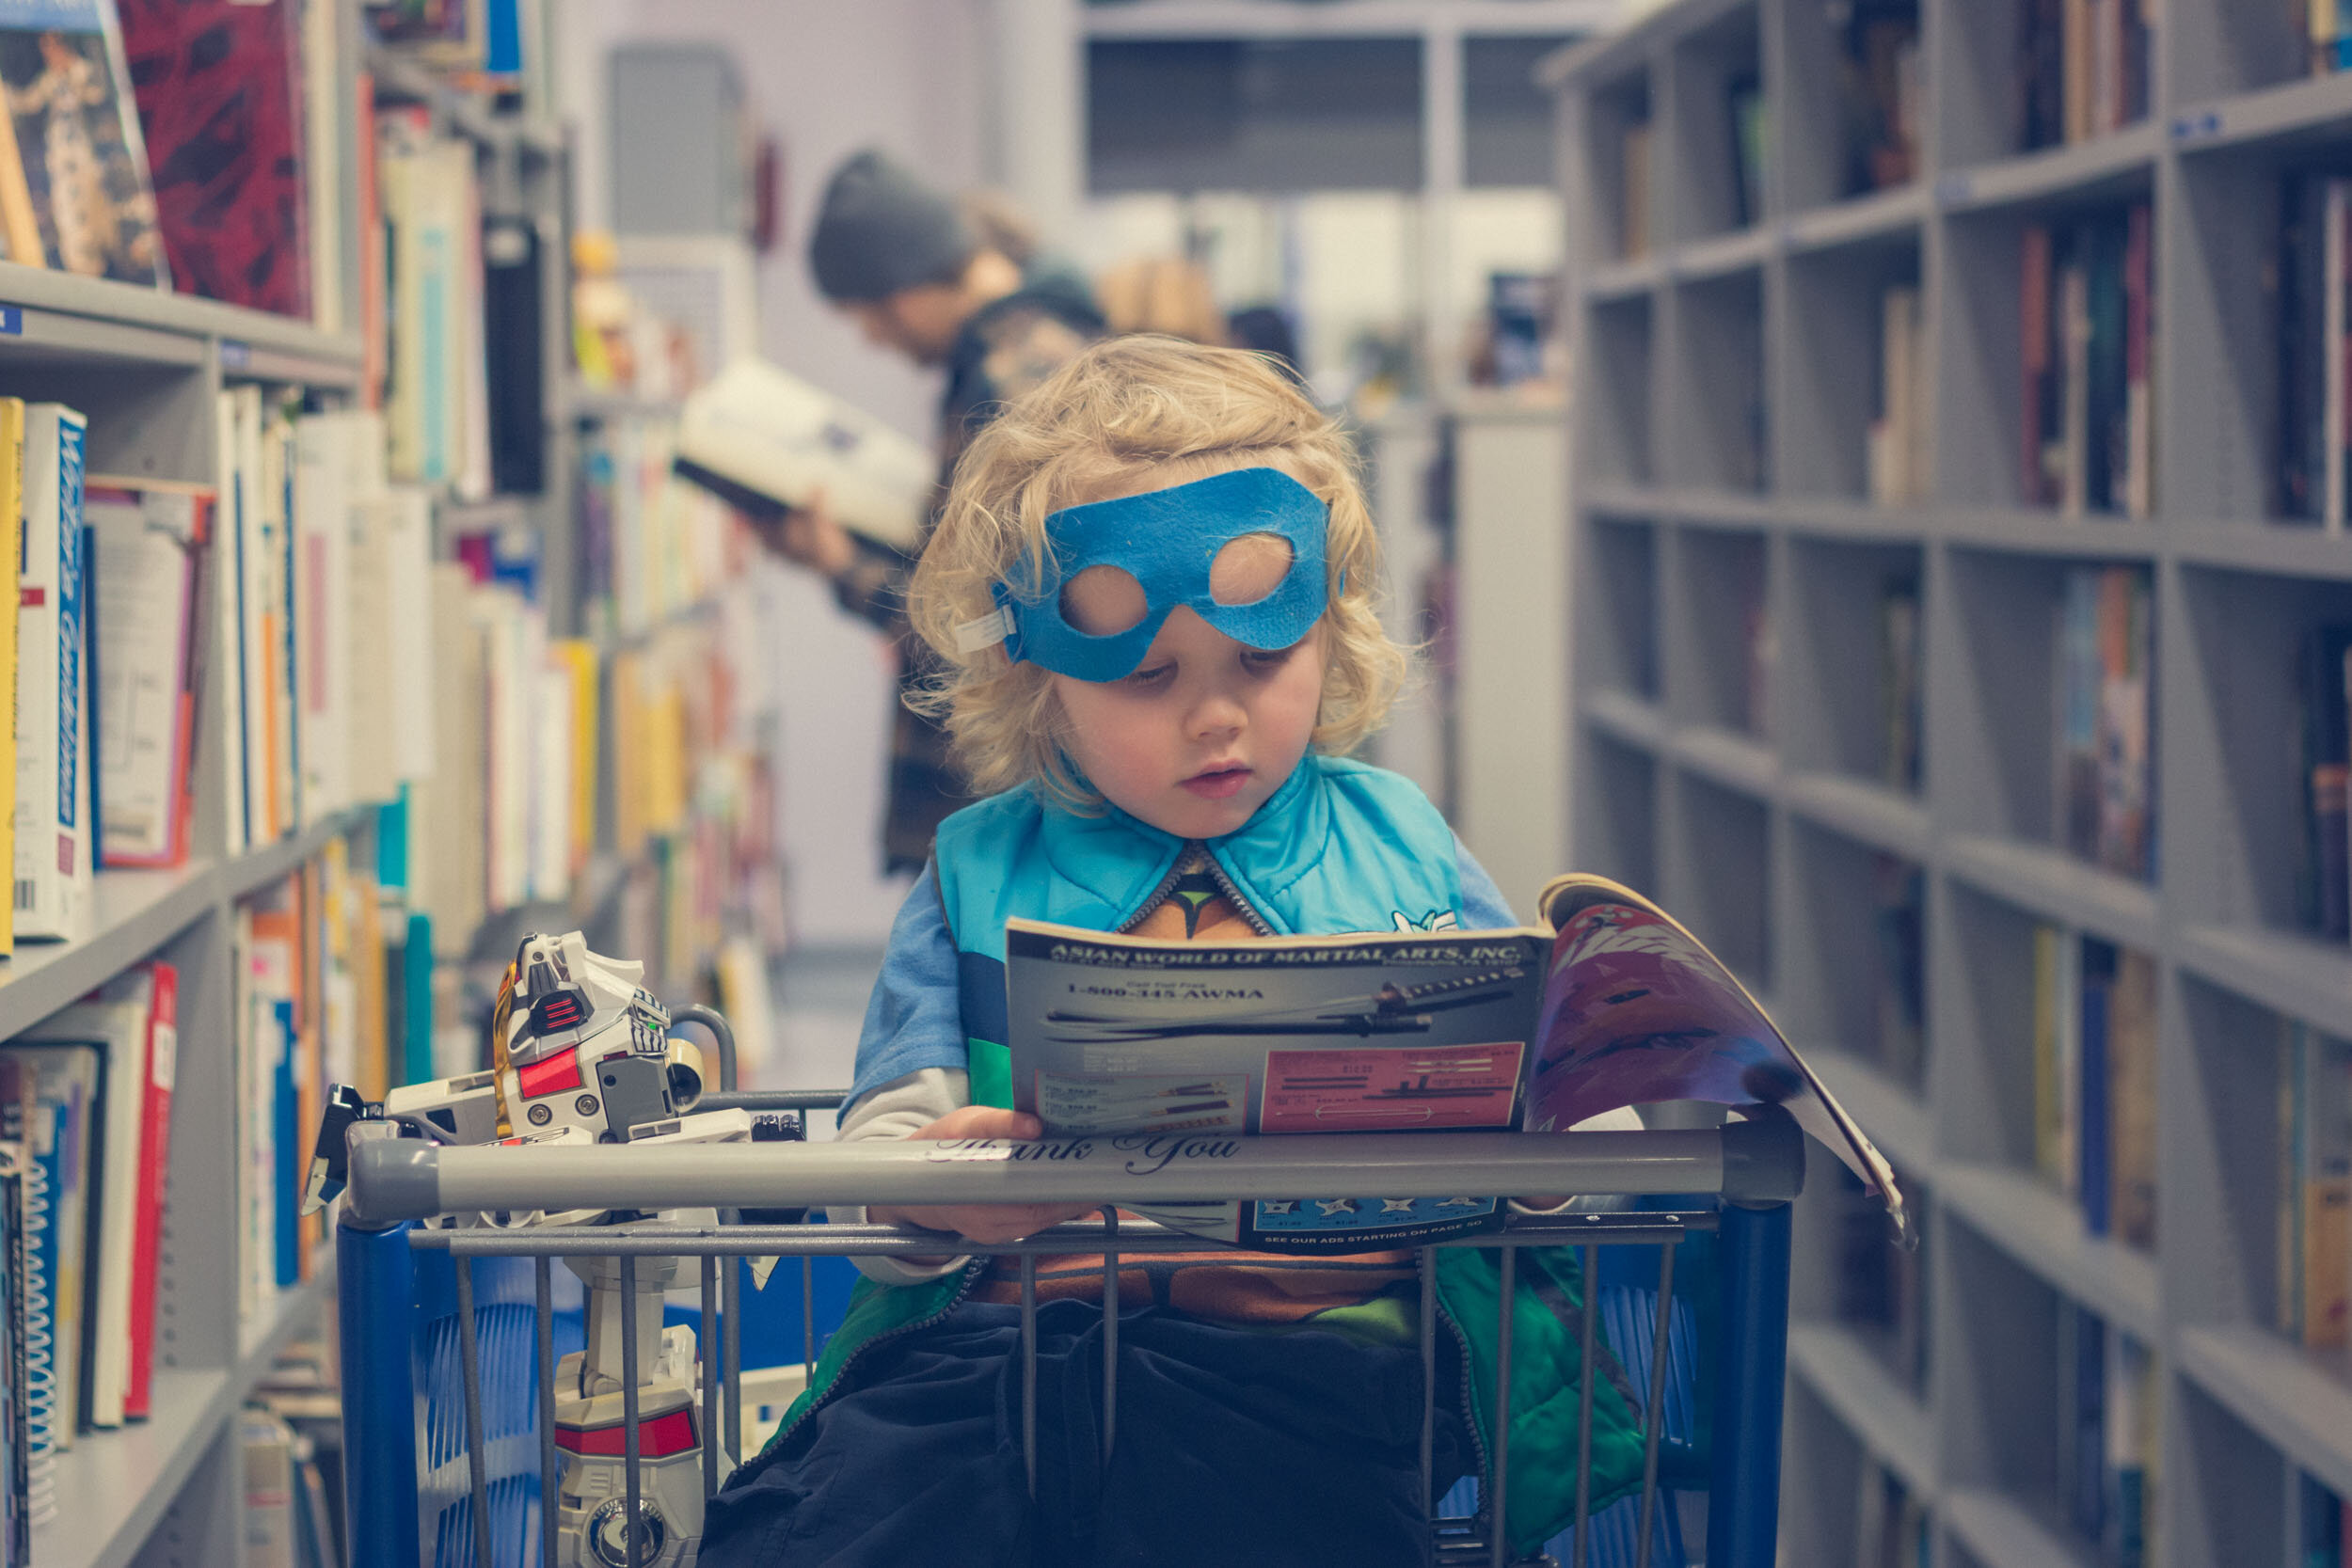 Four-year old boy sitting in shopping cart reading a book.